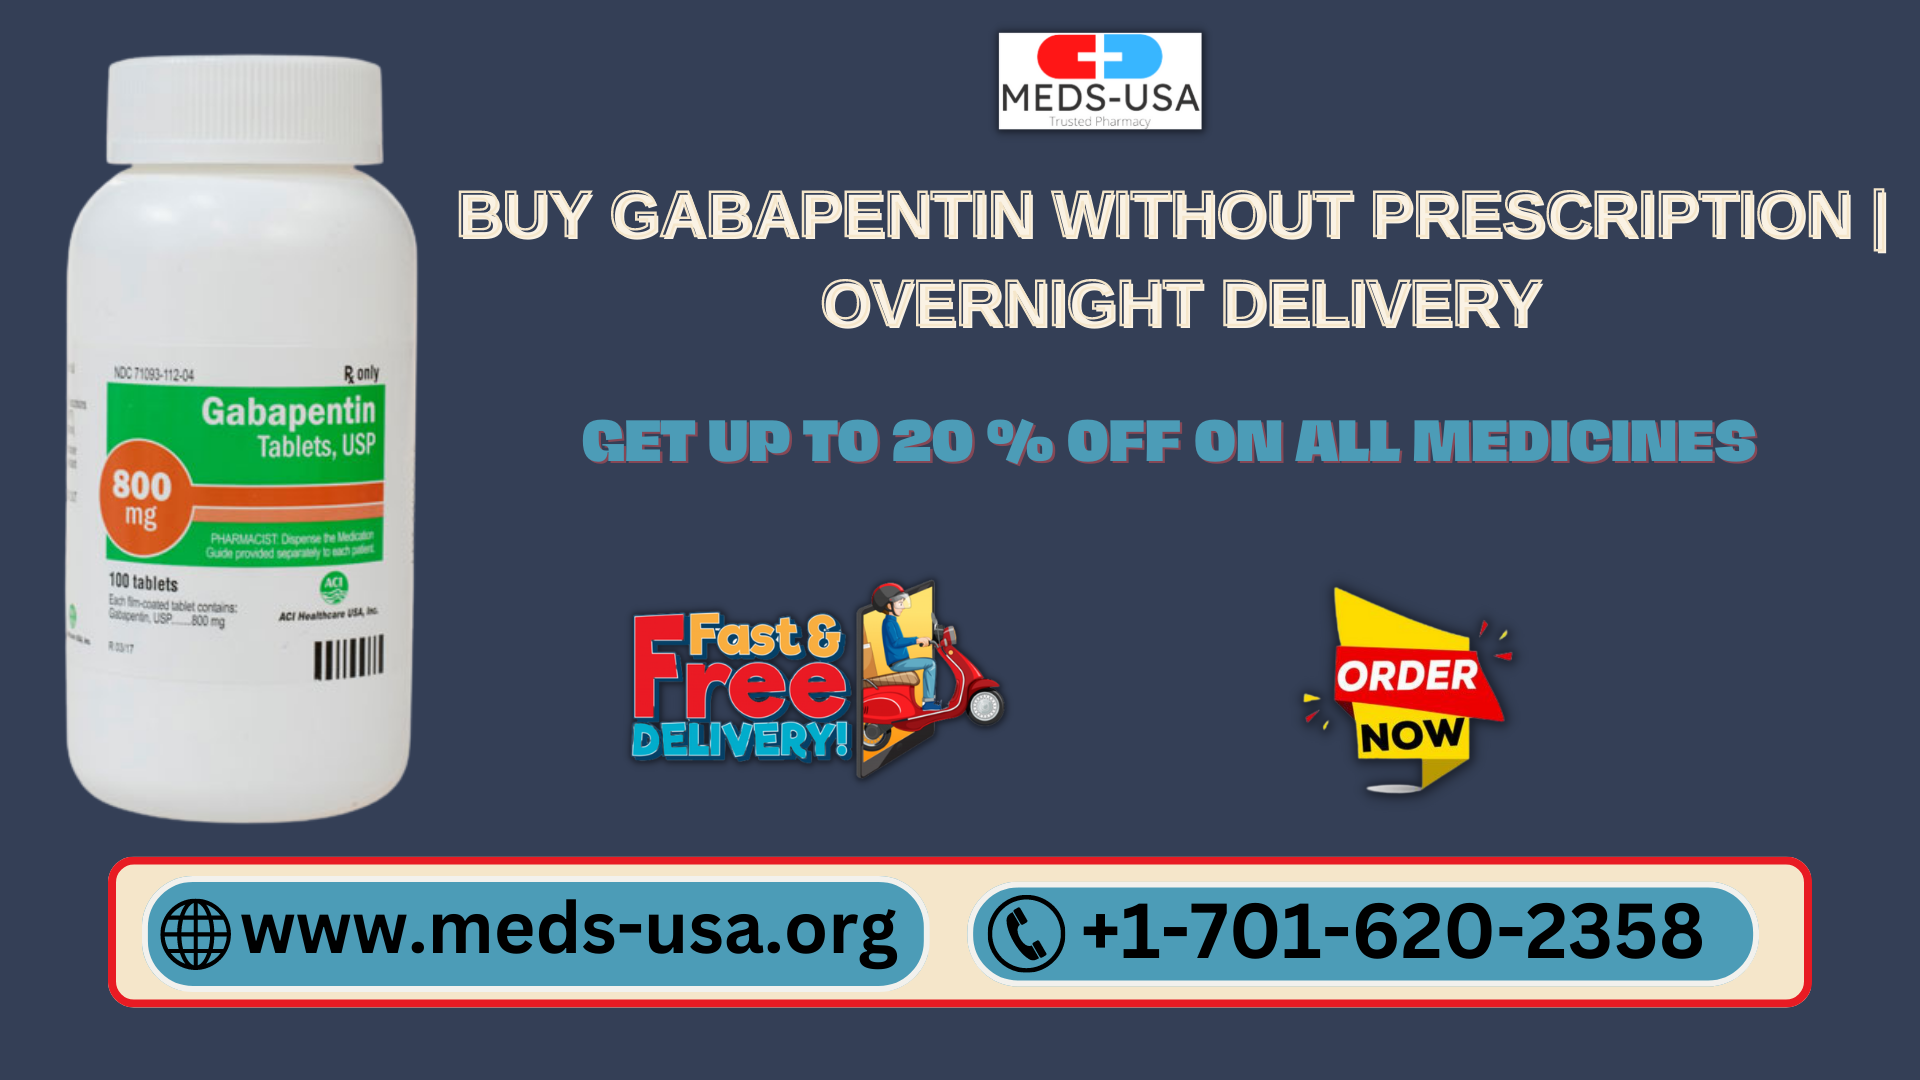 Buy Gabapentin without prescription Overnight Delivery